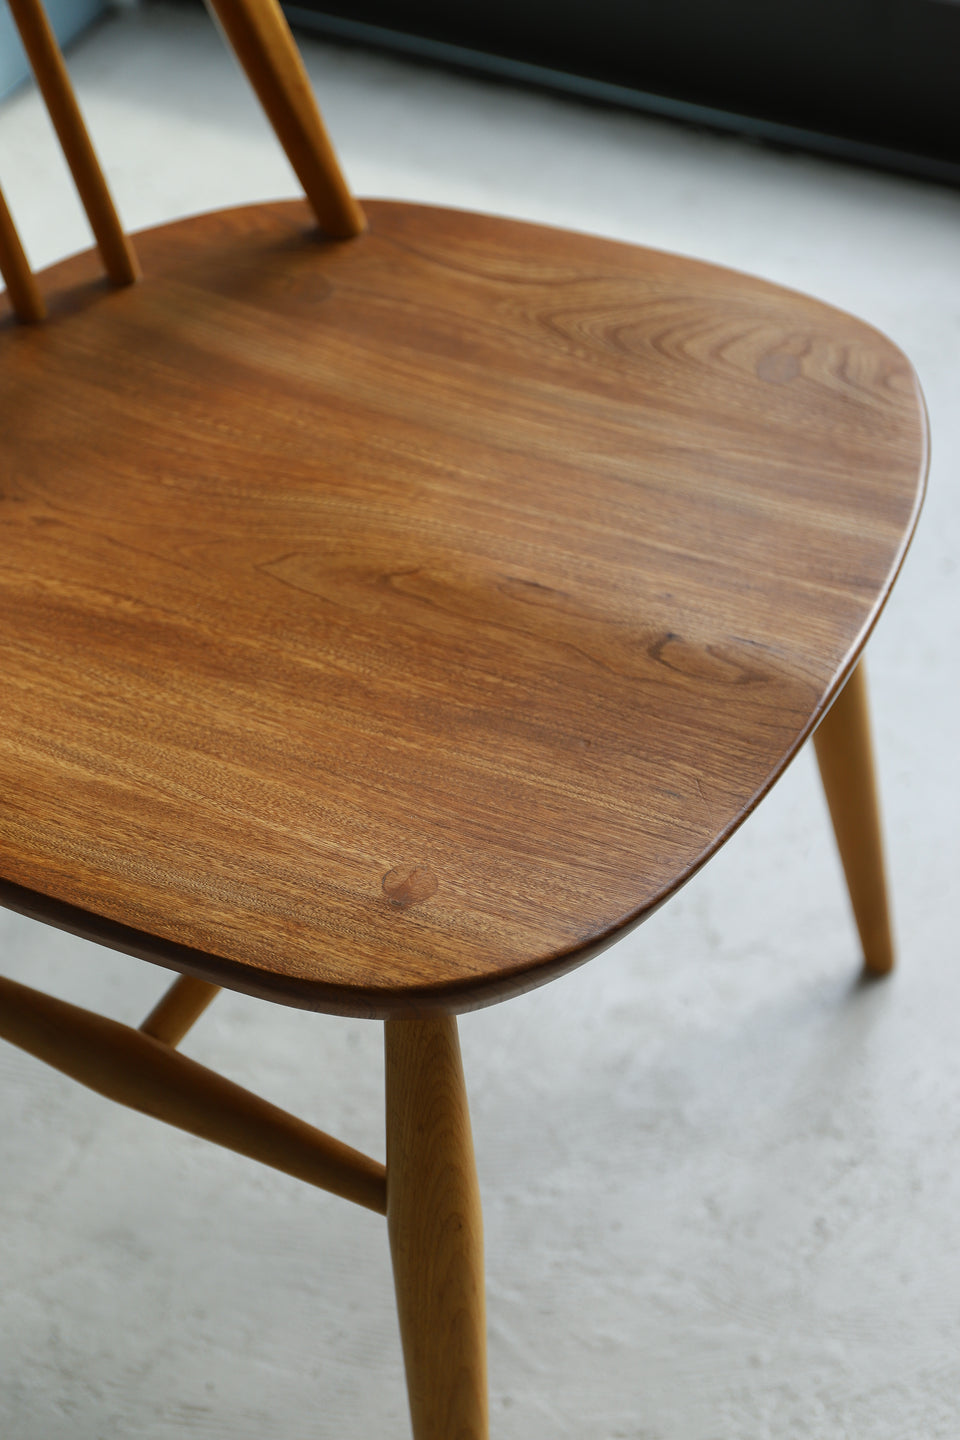 Ercol Quaker Chair UK Traditional Design/イギリス アーコール クゥエーカーチェア ウィンザーチェア ダイニング 椅子